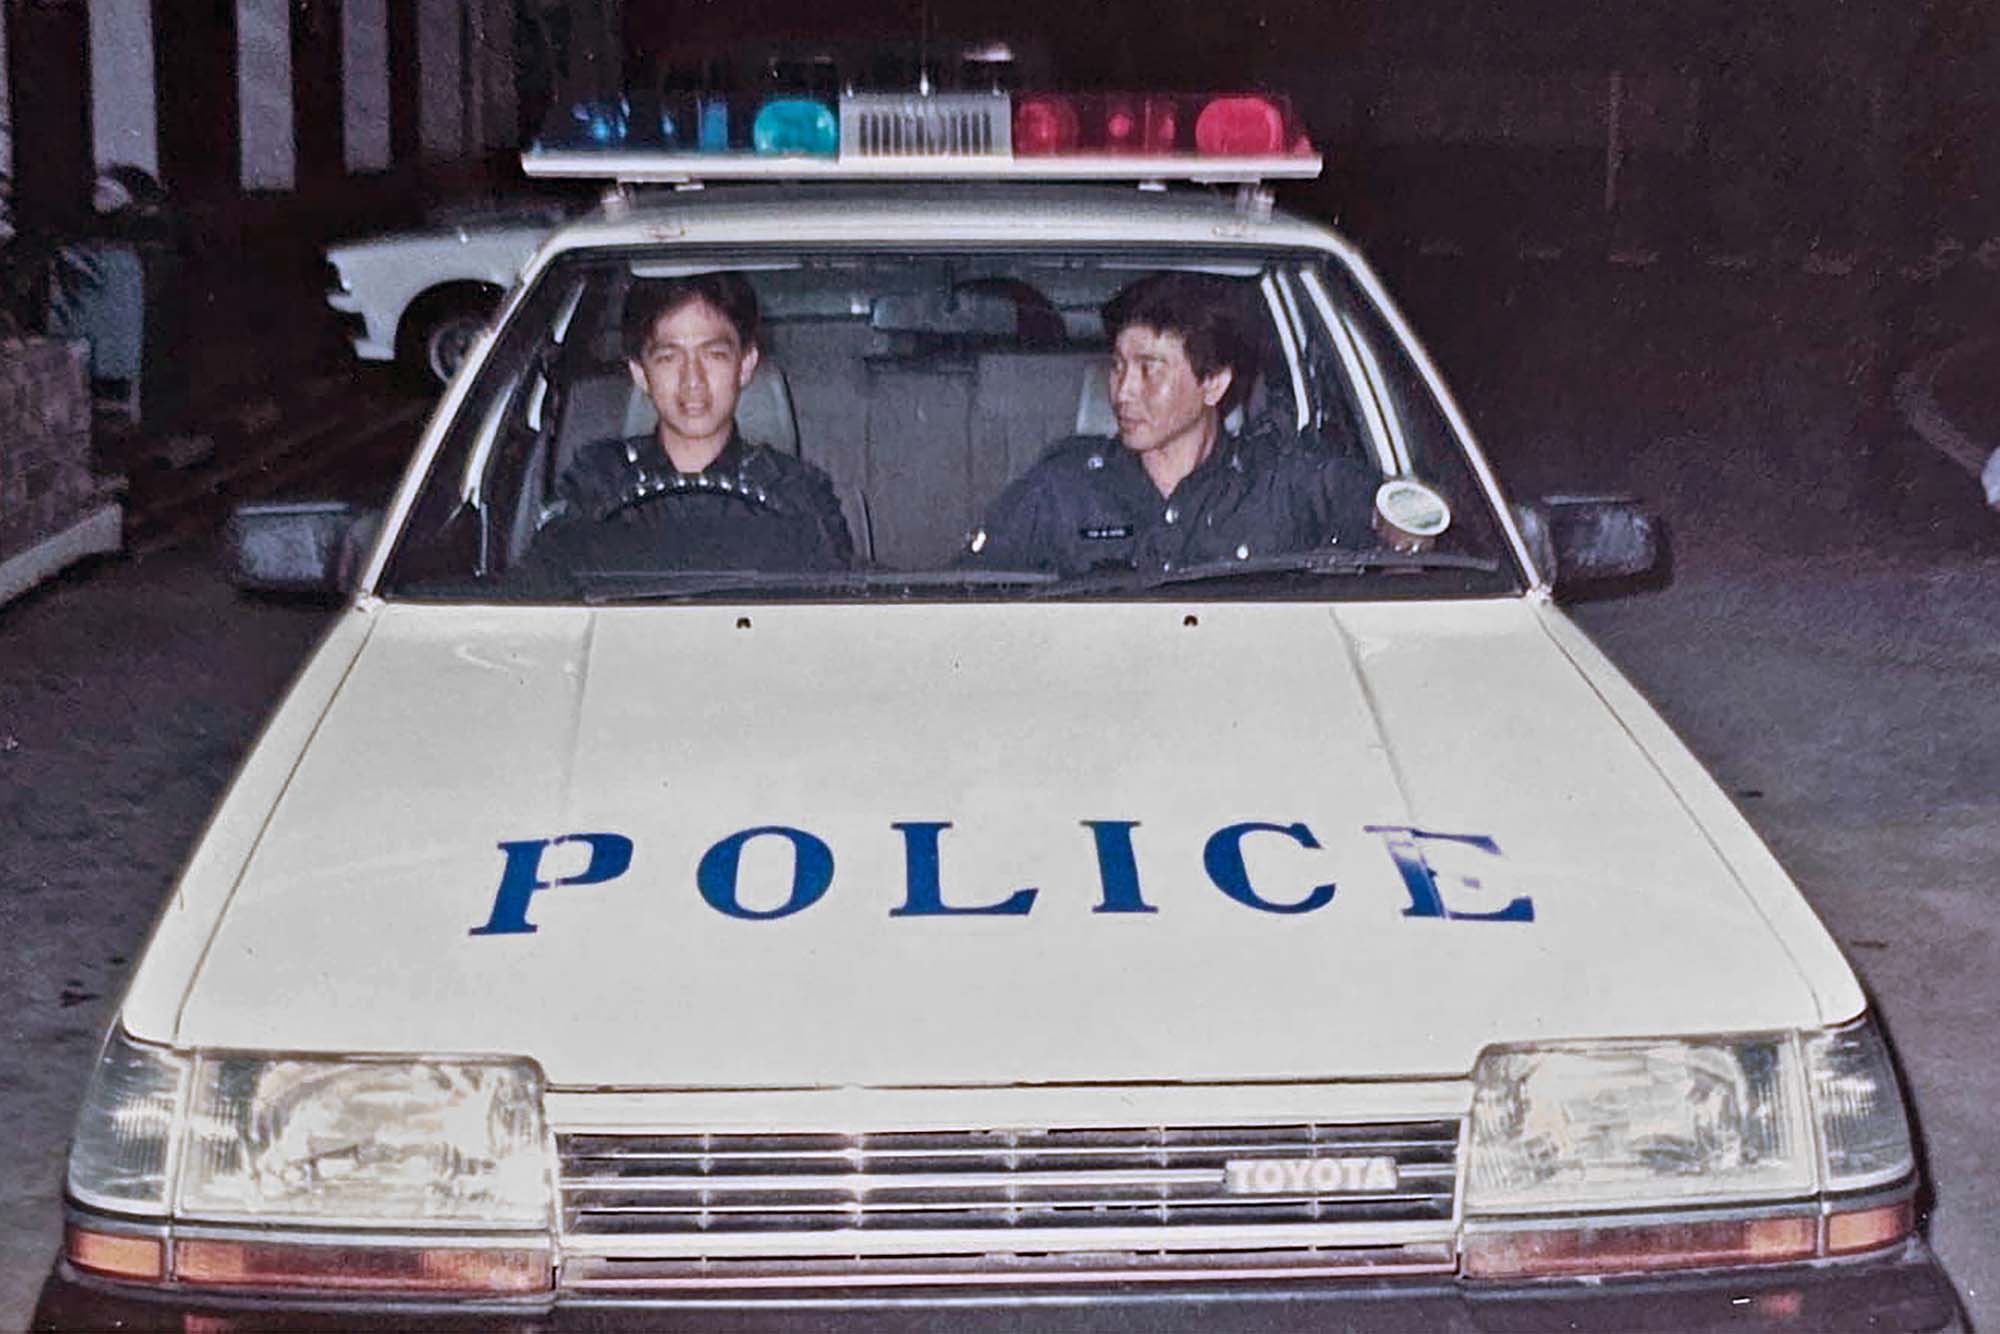 Mr Poh (right) and his fellow officer on patrol at Queenstown Police Division in 1984. PHOTO: Mr Poh Ah Keong